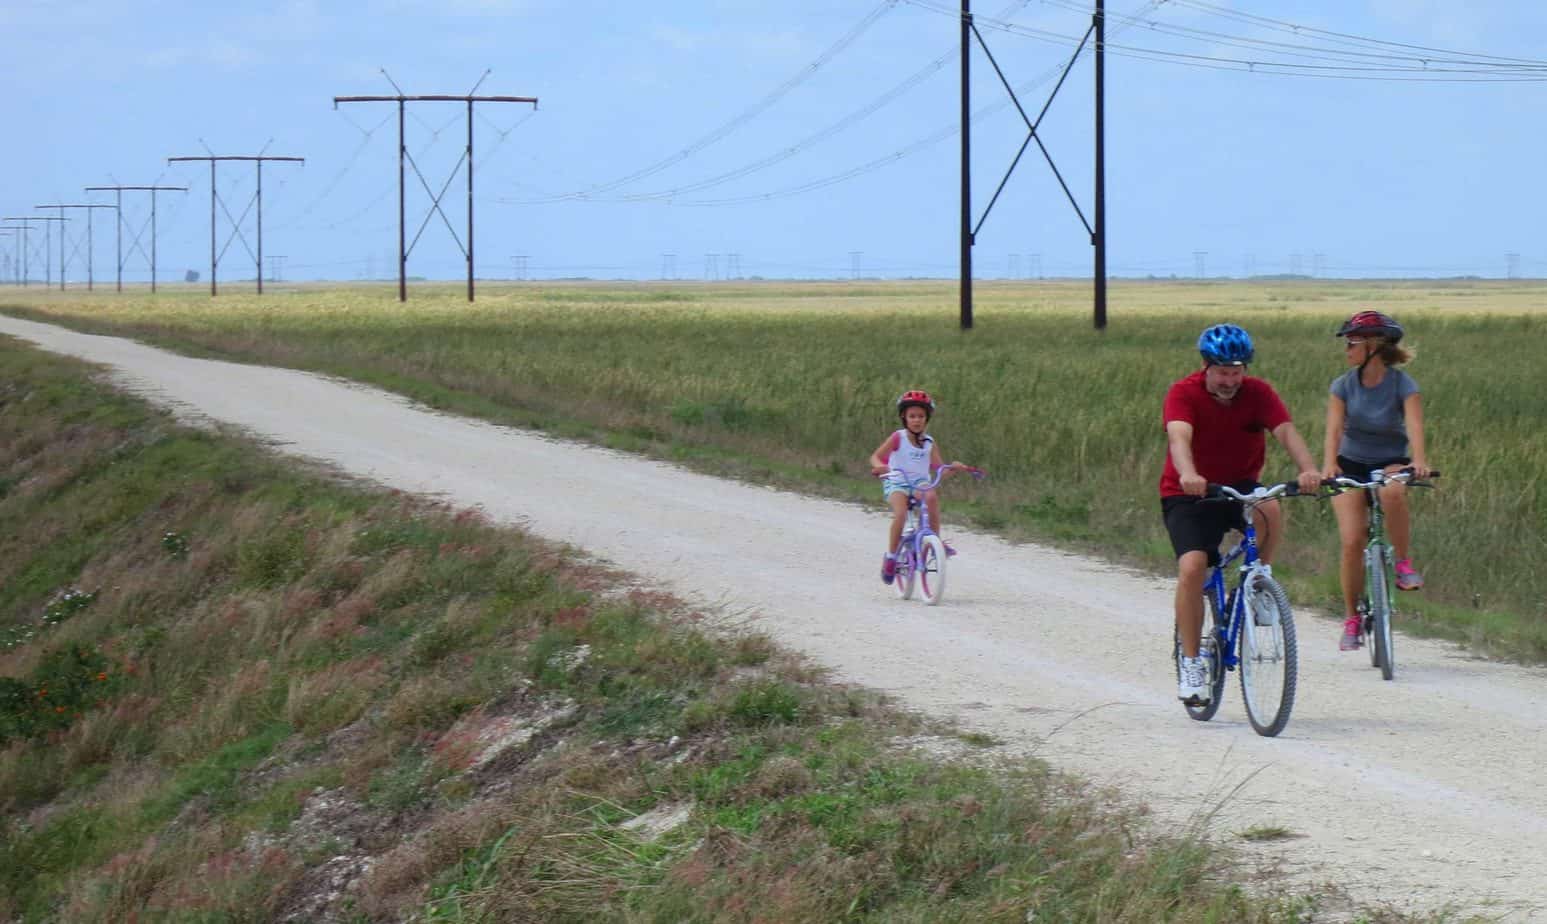 The Markham Park levee trail in Sunrise is a safe spot for family biking.